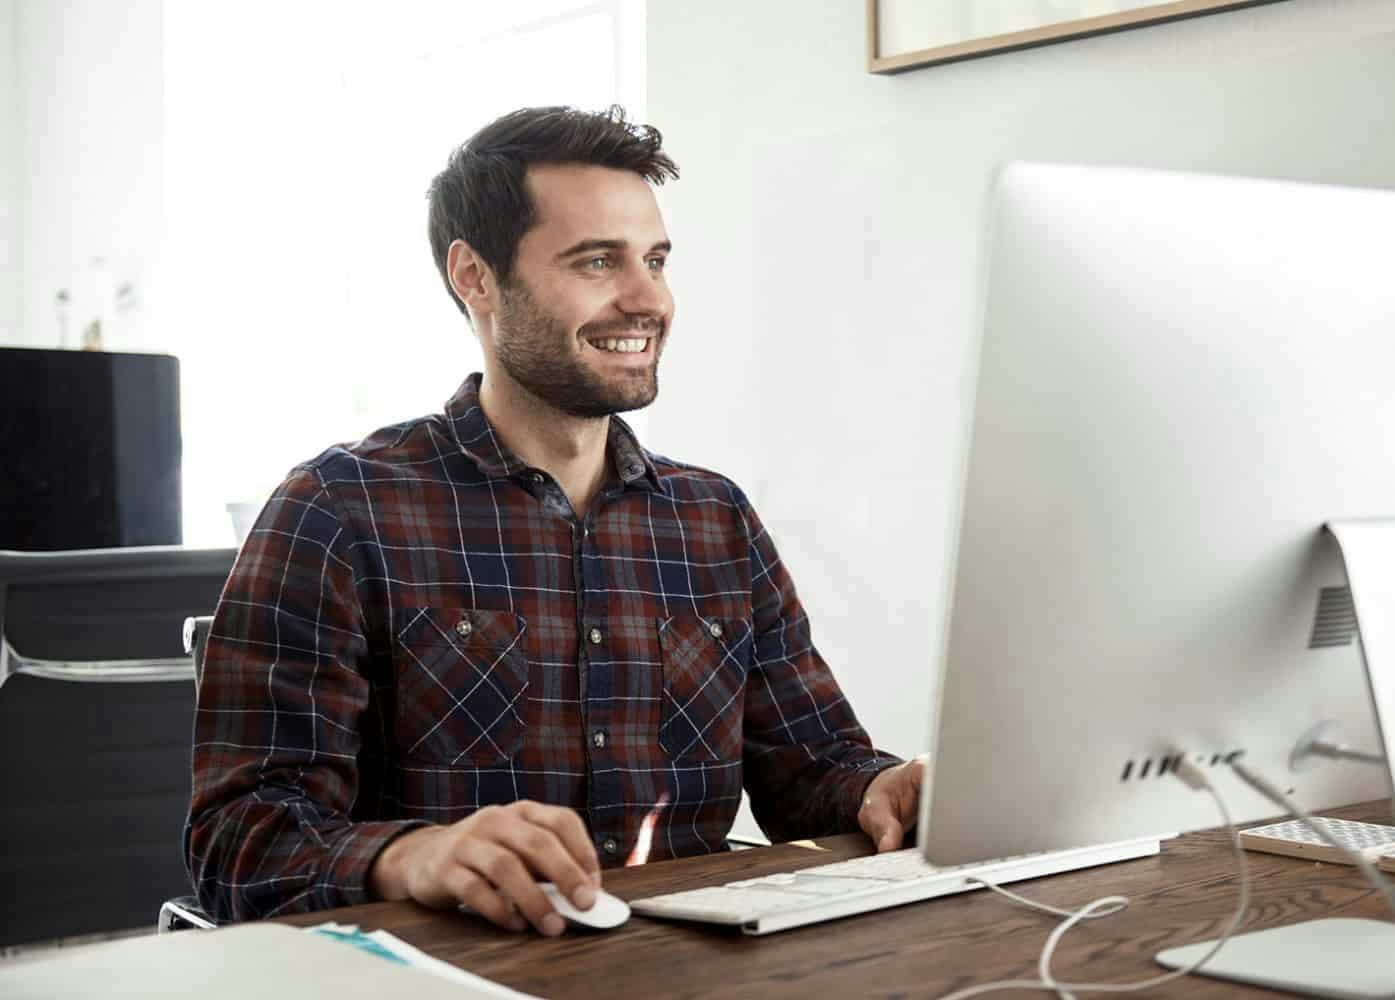 Man working at a desk on computer smiling